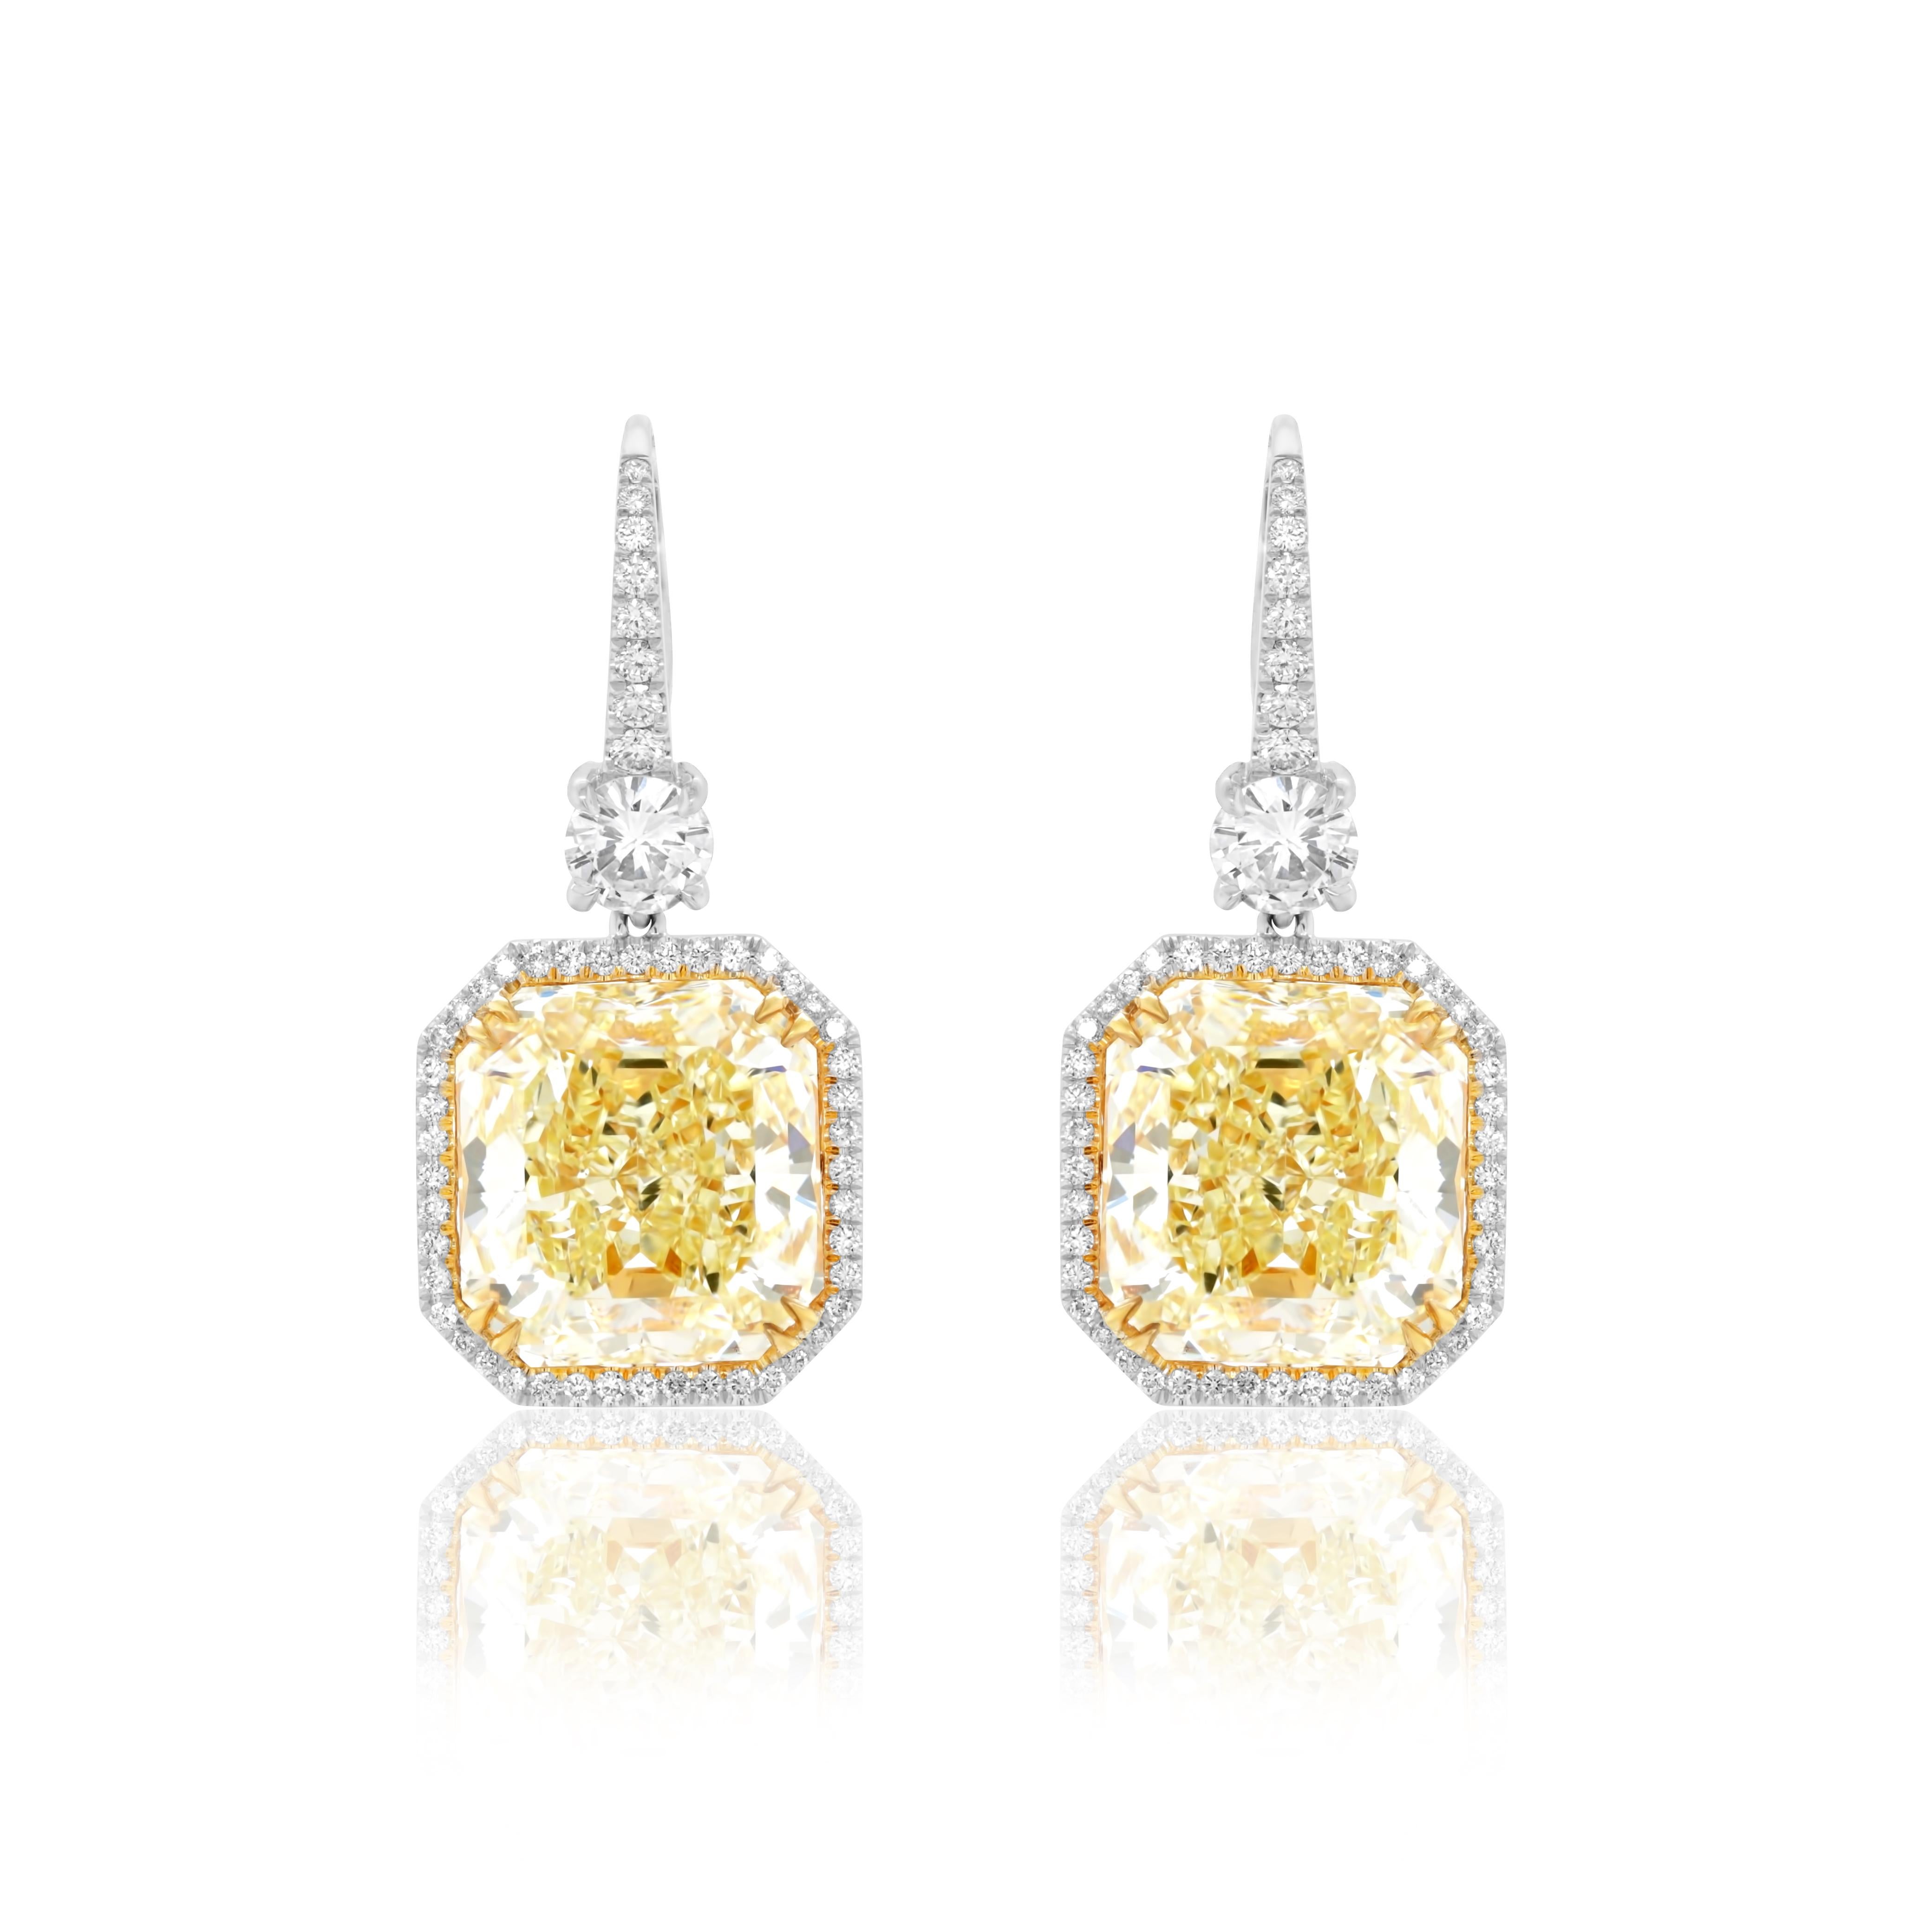 Platinum & 18KT Important earrings total 24.60cts Radiant Natural Fancy Yellow VVS2 GIA# 5151585333 & 5182122295, with settings 1.80cts diamonds  